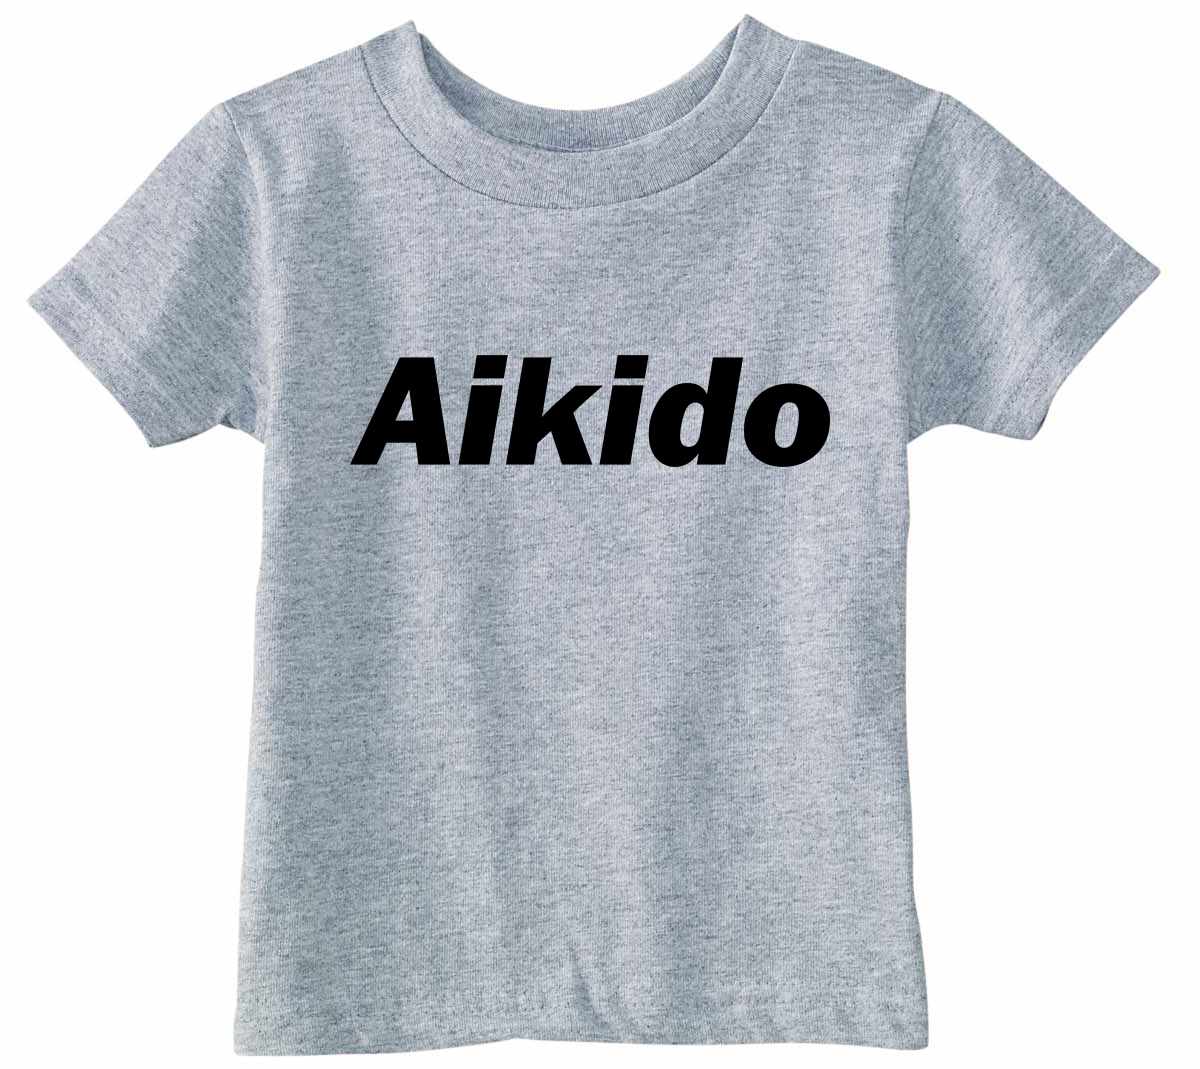 Aikido Infant/Toddler 